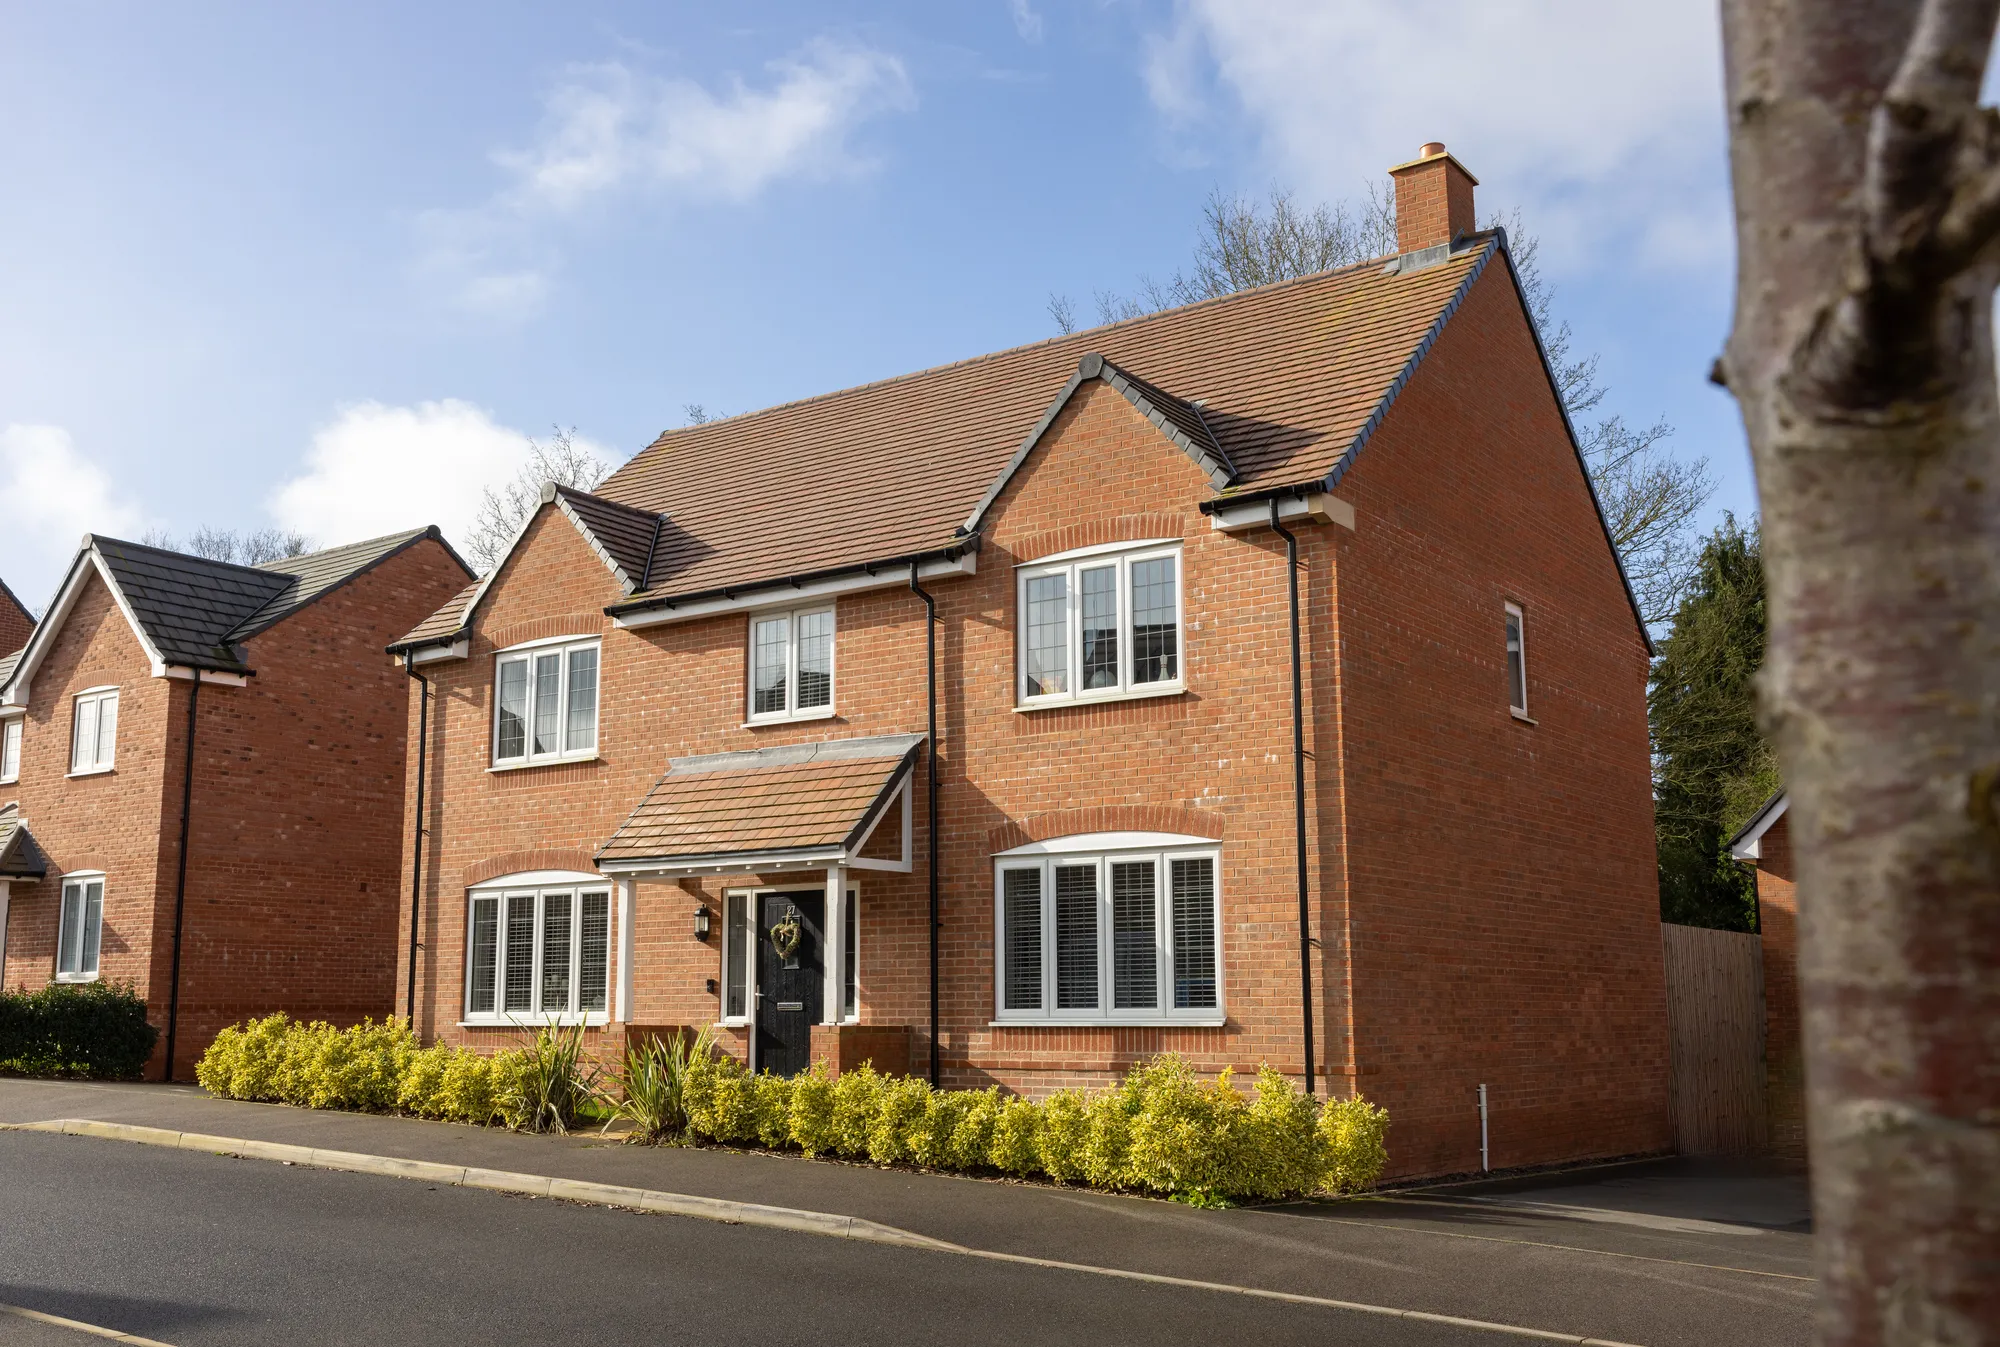 5 bed detached house for sale in Harris Way, Kenilworth - Property Image 1